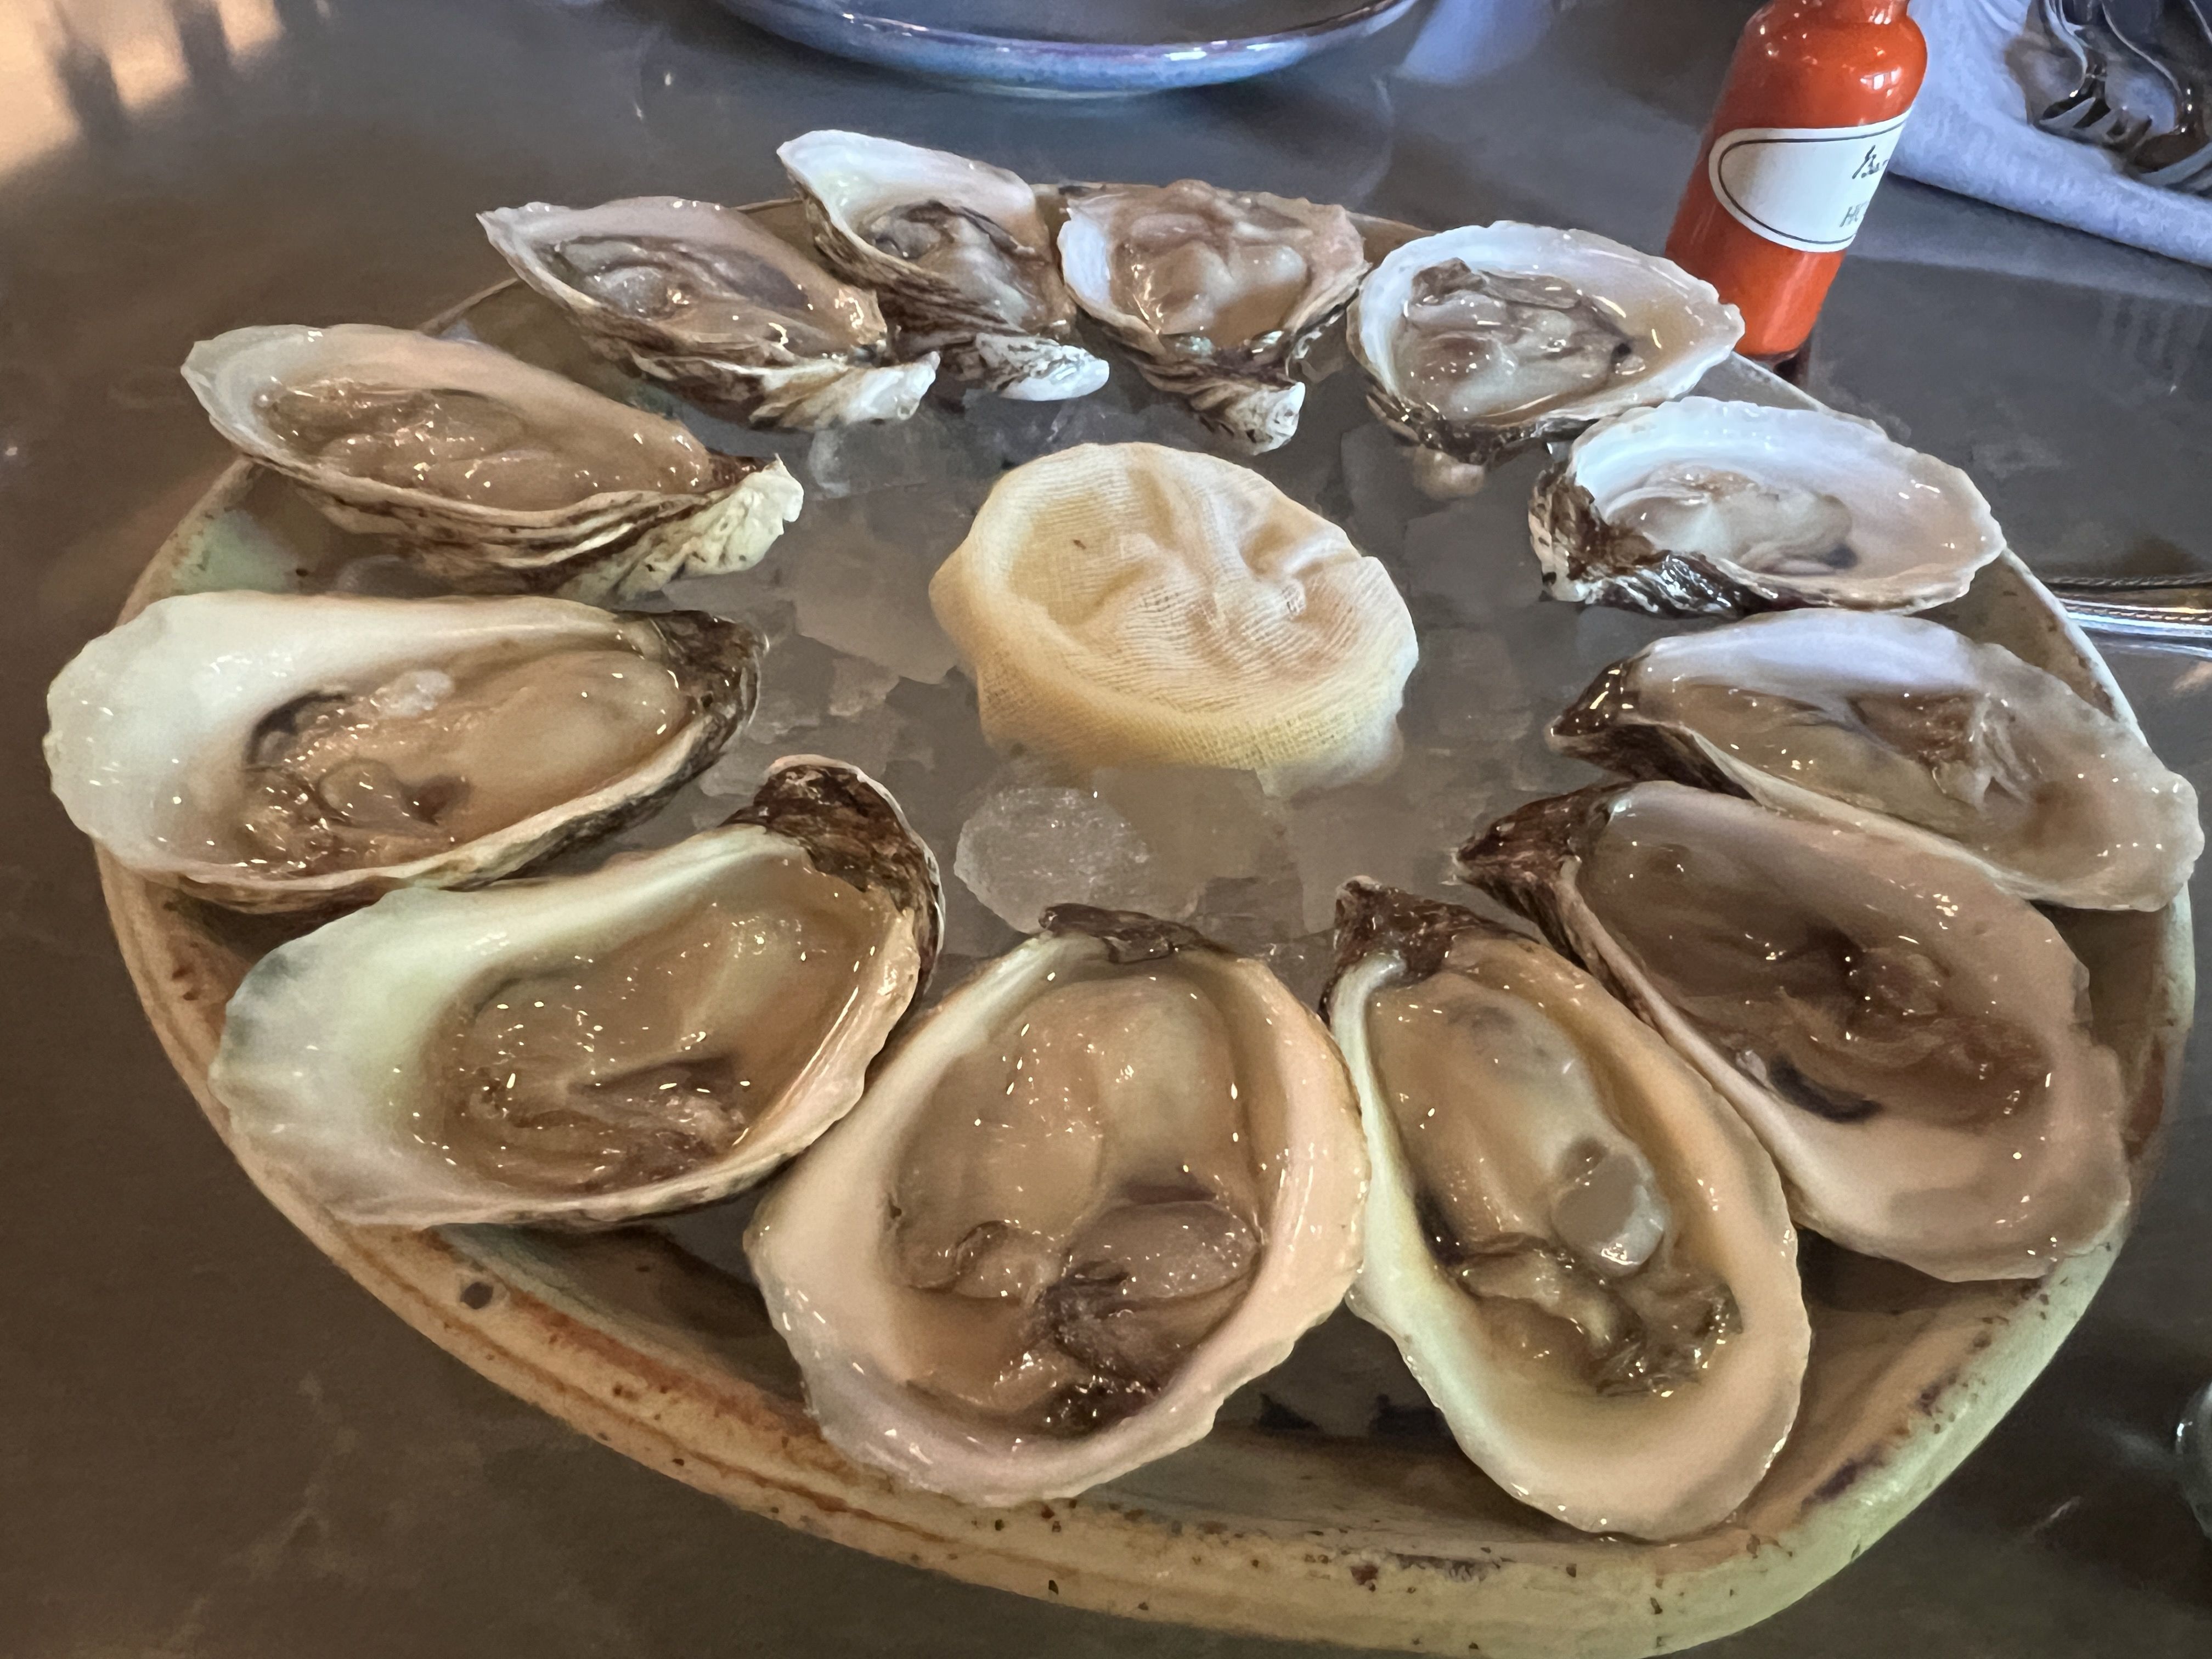 Bar Pigalle's raw oysters are served with a homemade hot sauce and mignonette